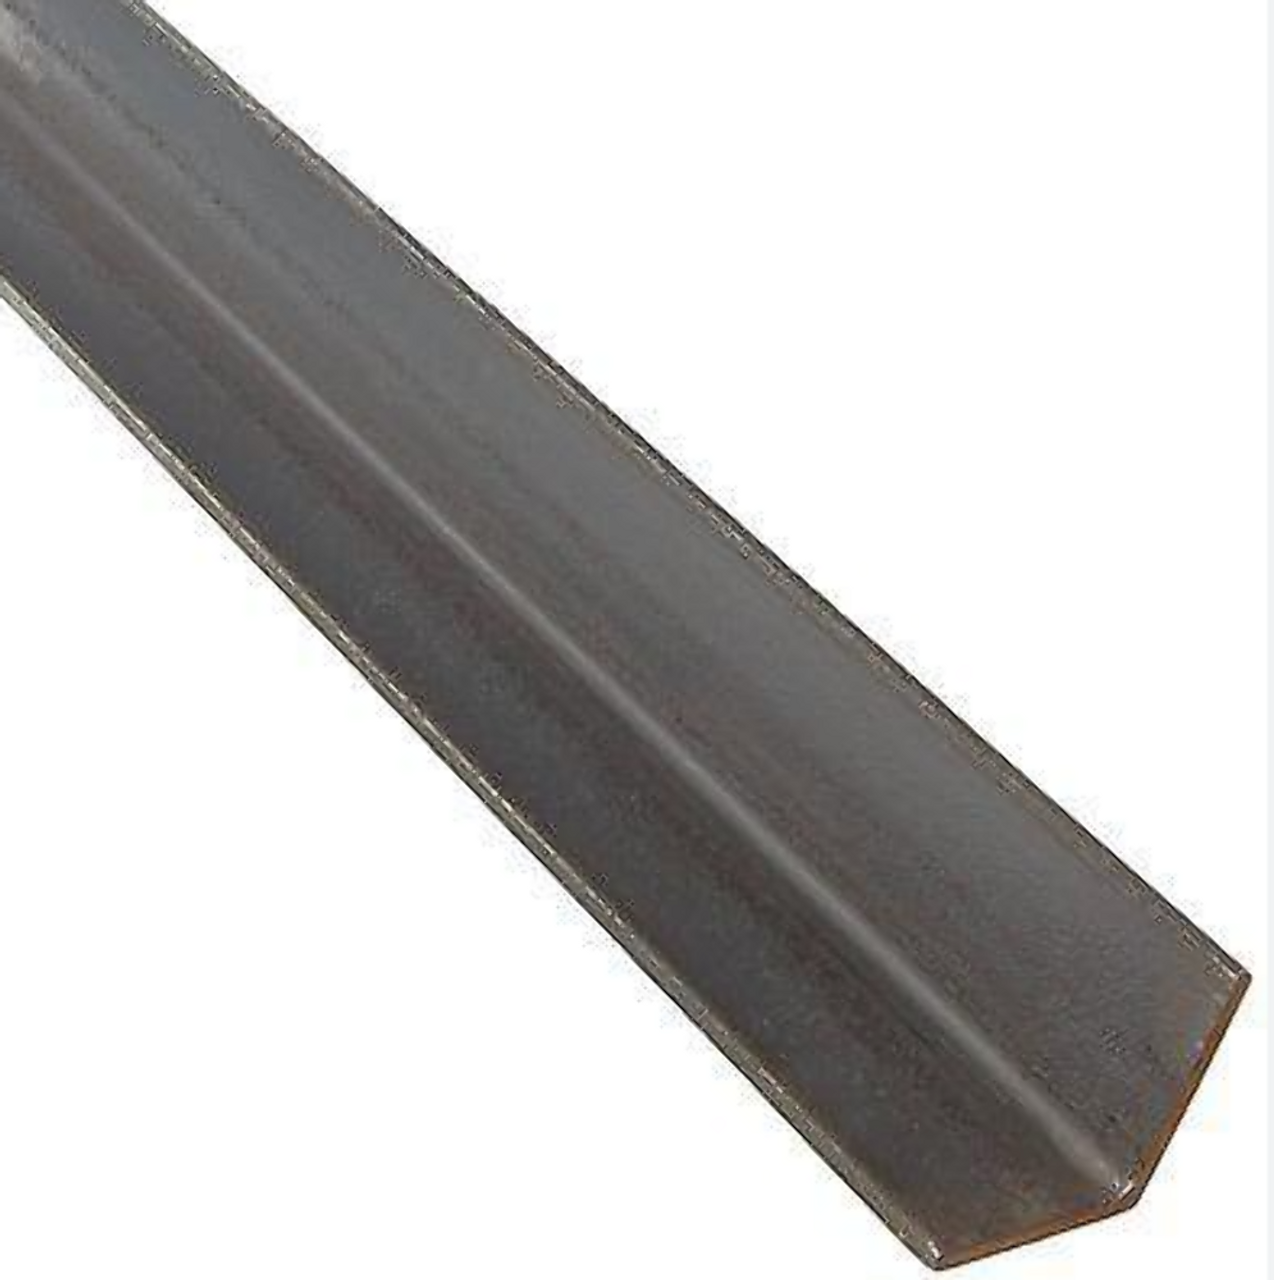 1-1/2 Inch x 1/8 Inch x 20 Ft Inch Angle Iron A-36